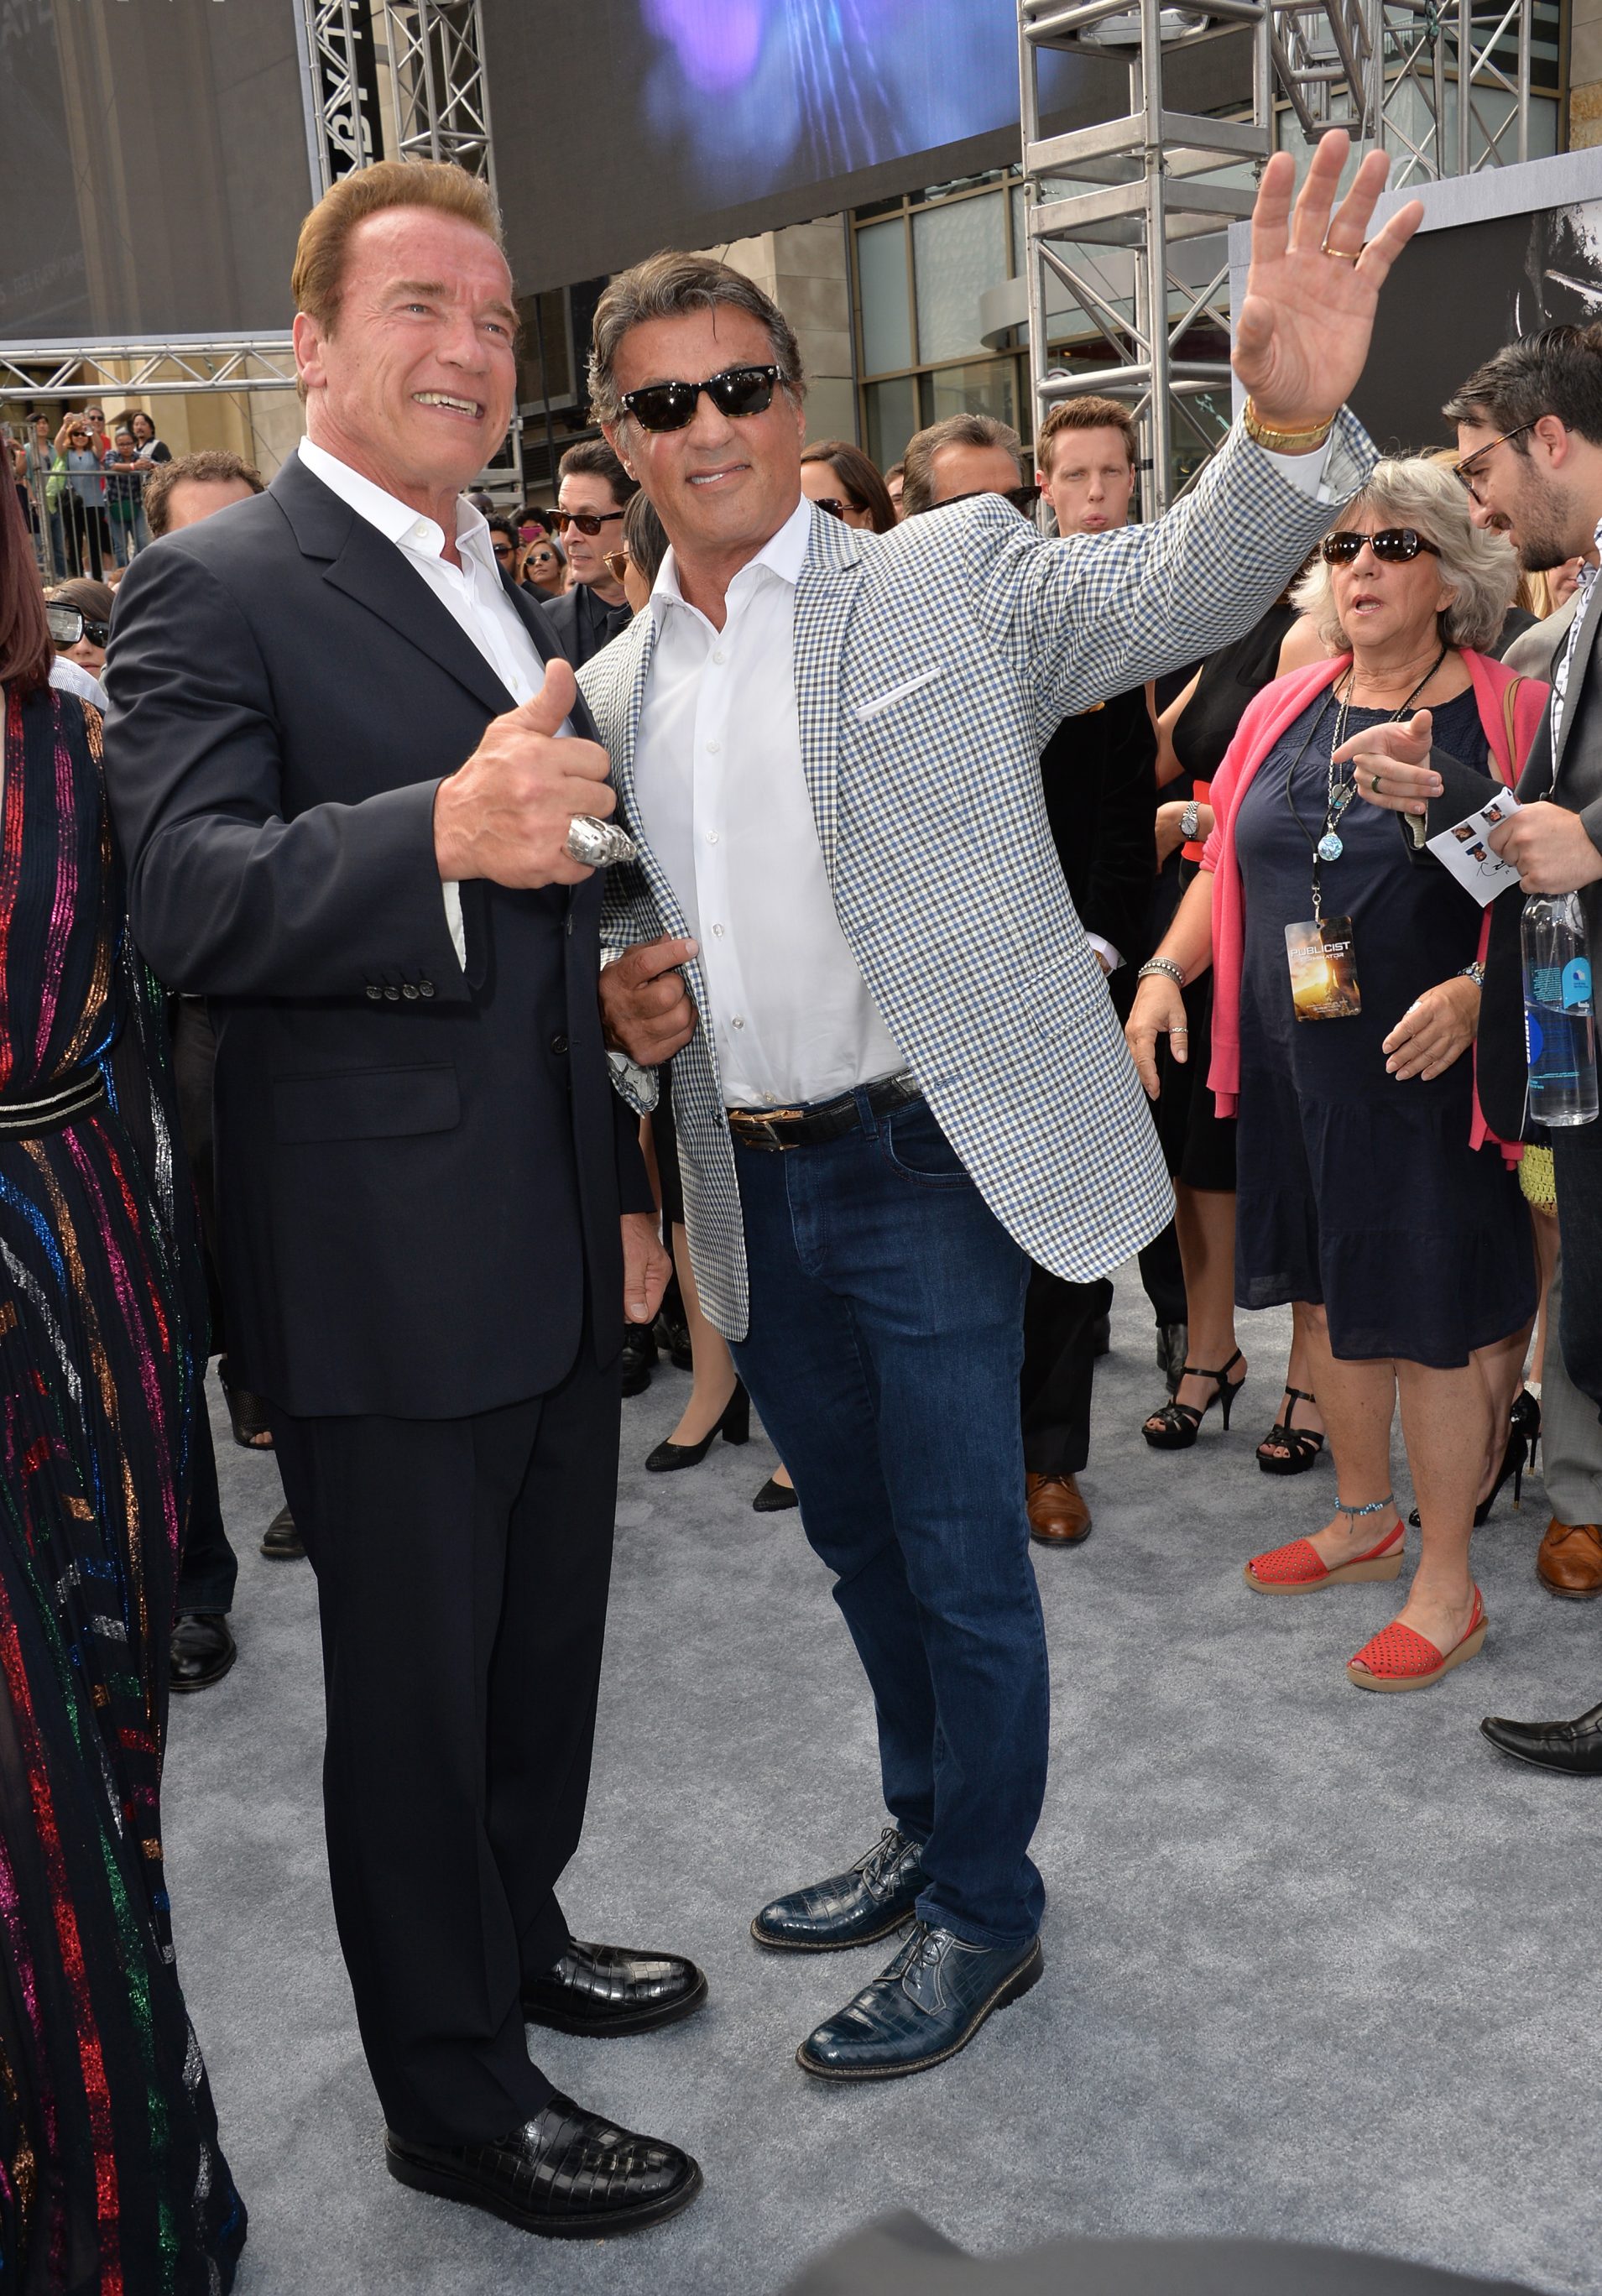 Arnold Schwarzenegger and Sylvester Stallone at Terminator Genisys Los Angeles premiere 2015